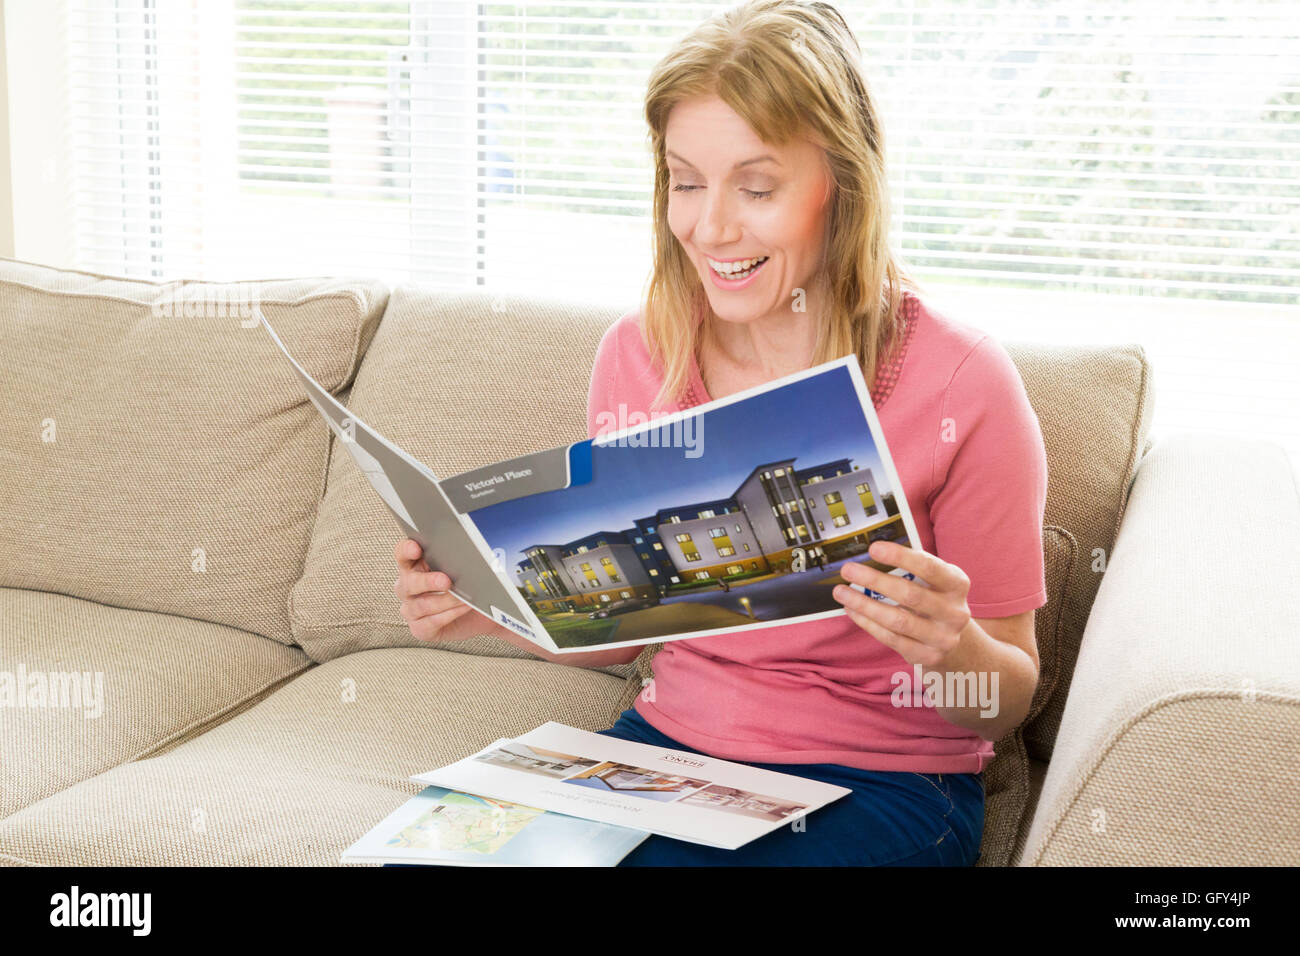 woman reading an estate agent's brochure Stock Photo